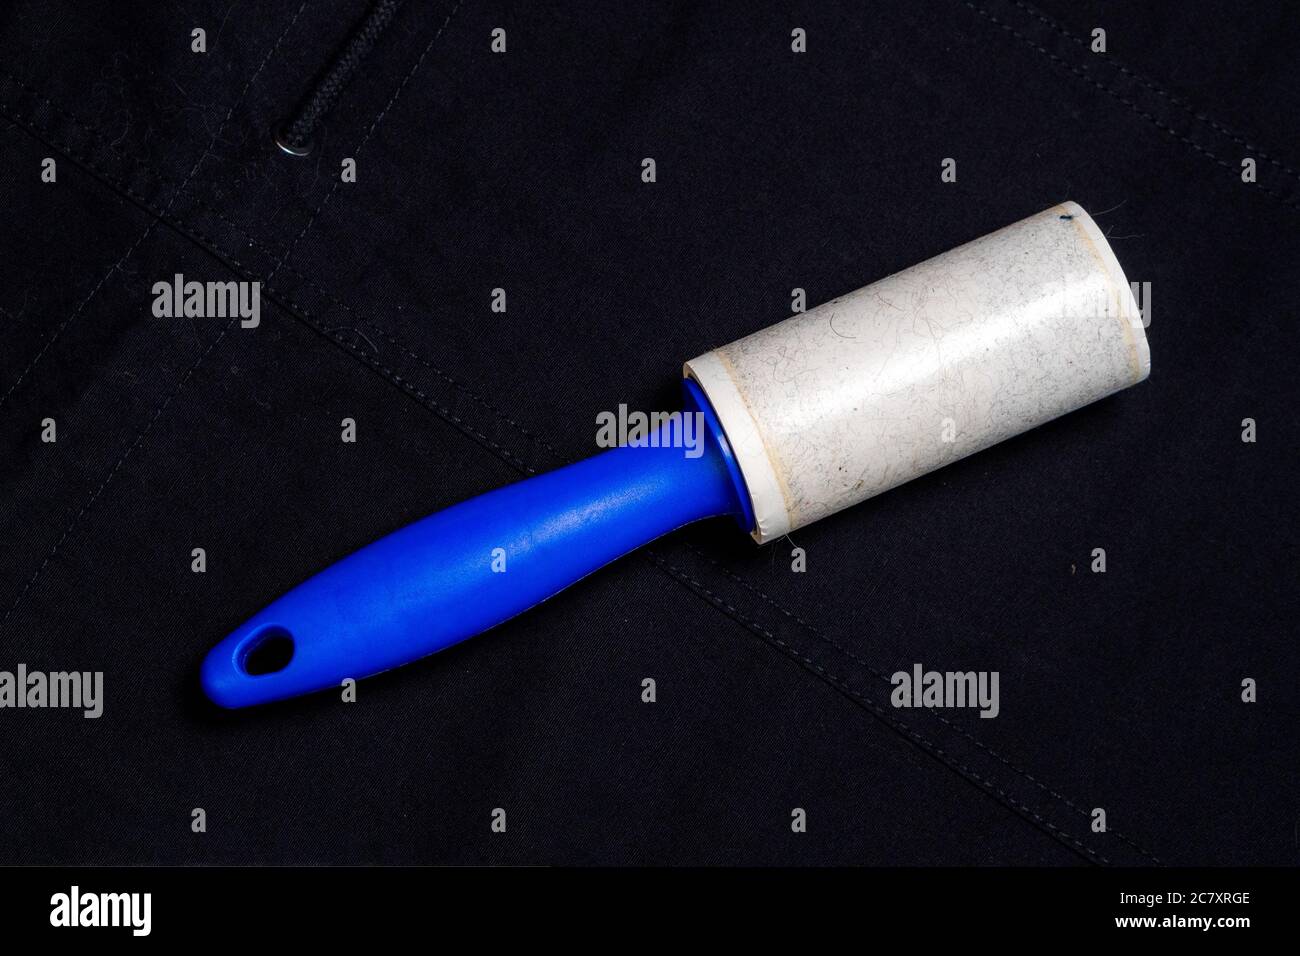 Adhesive roller for cleaning cloth on a black cloth. Top view Stock Photo